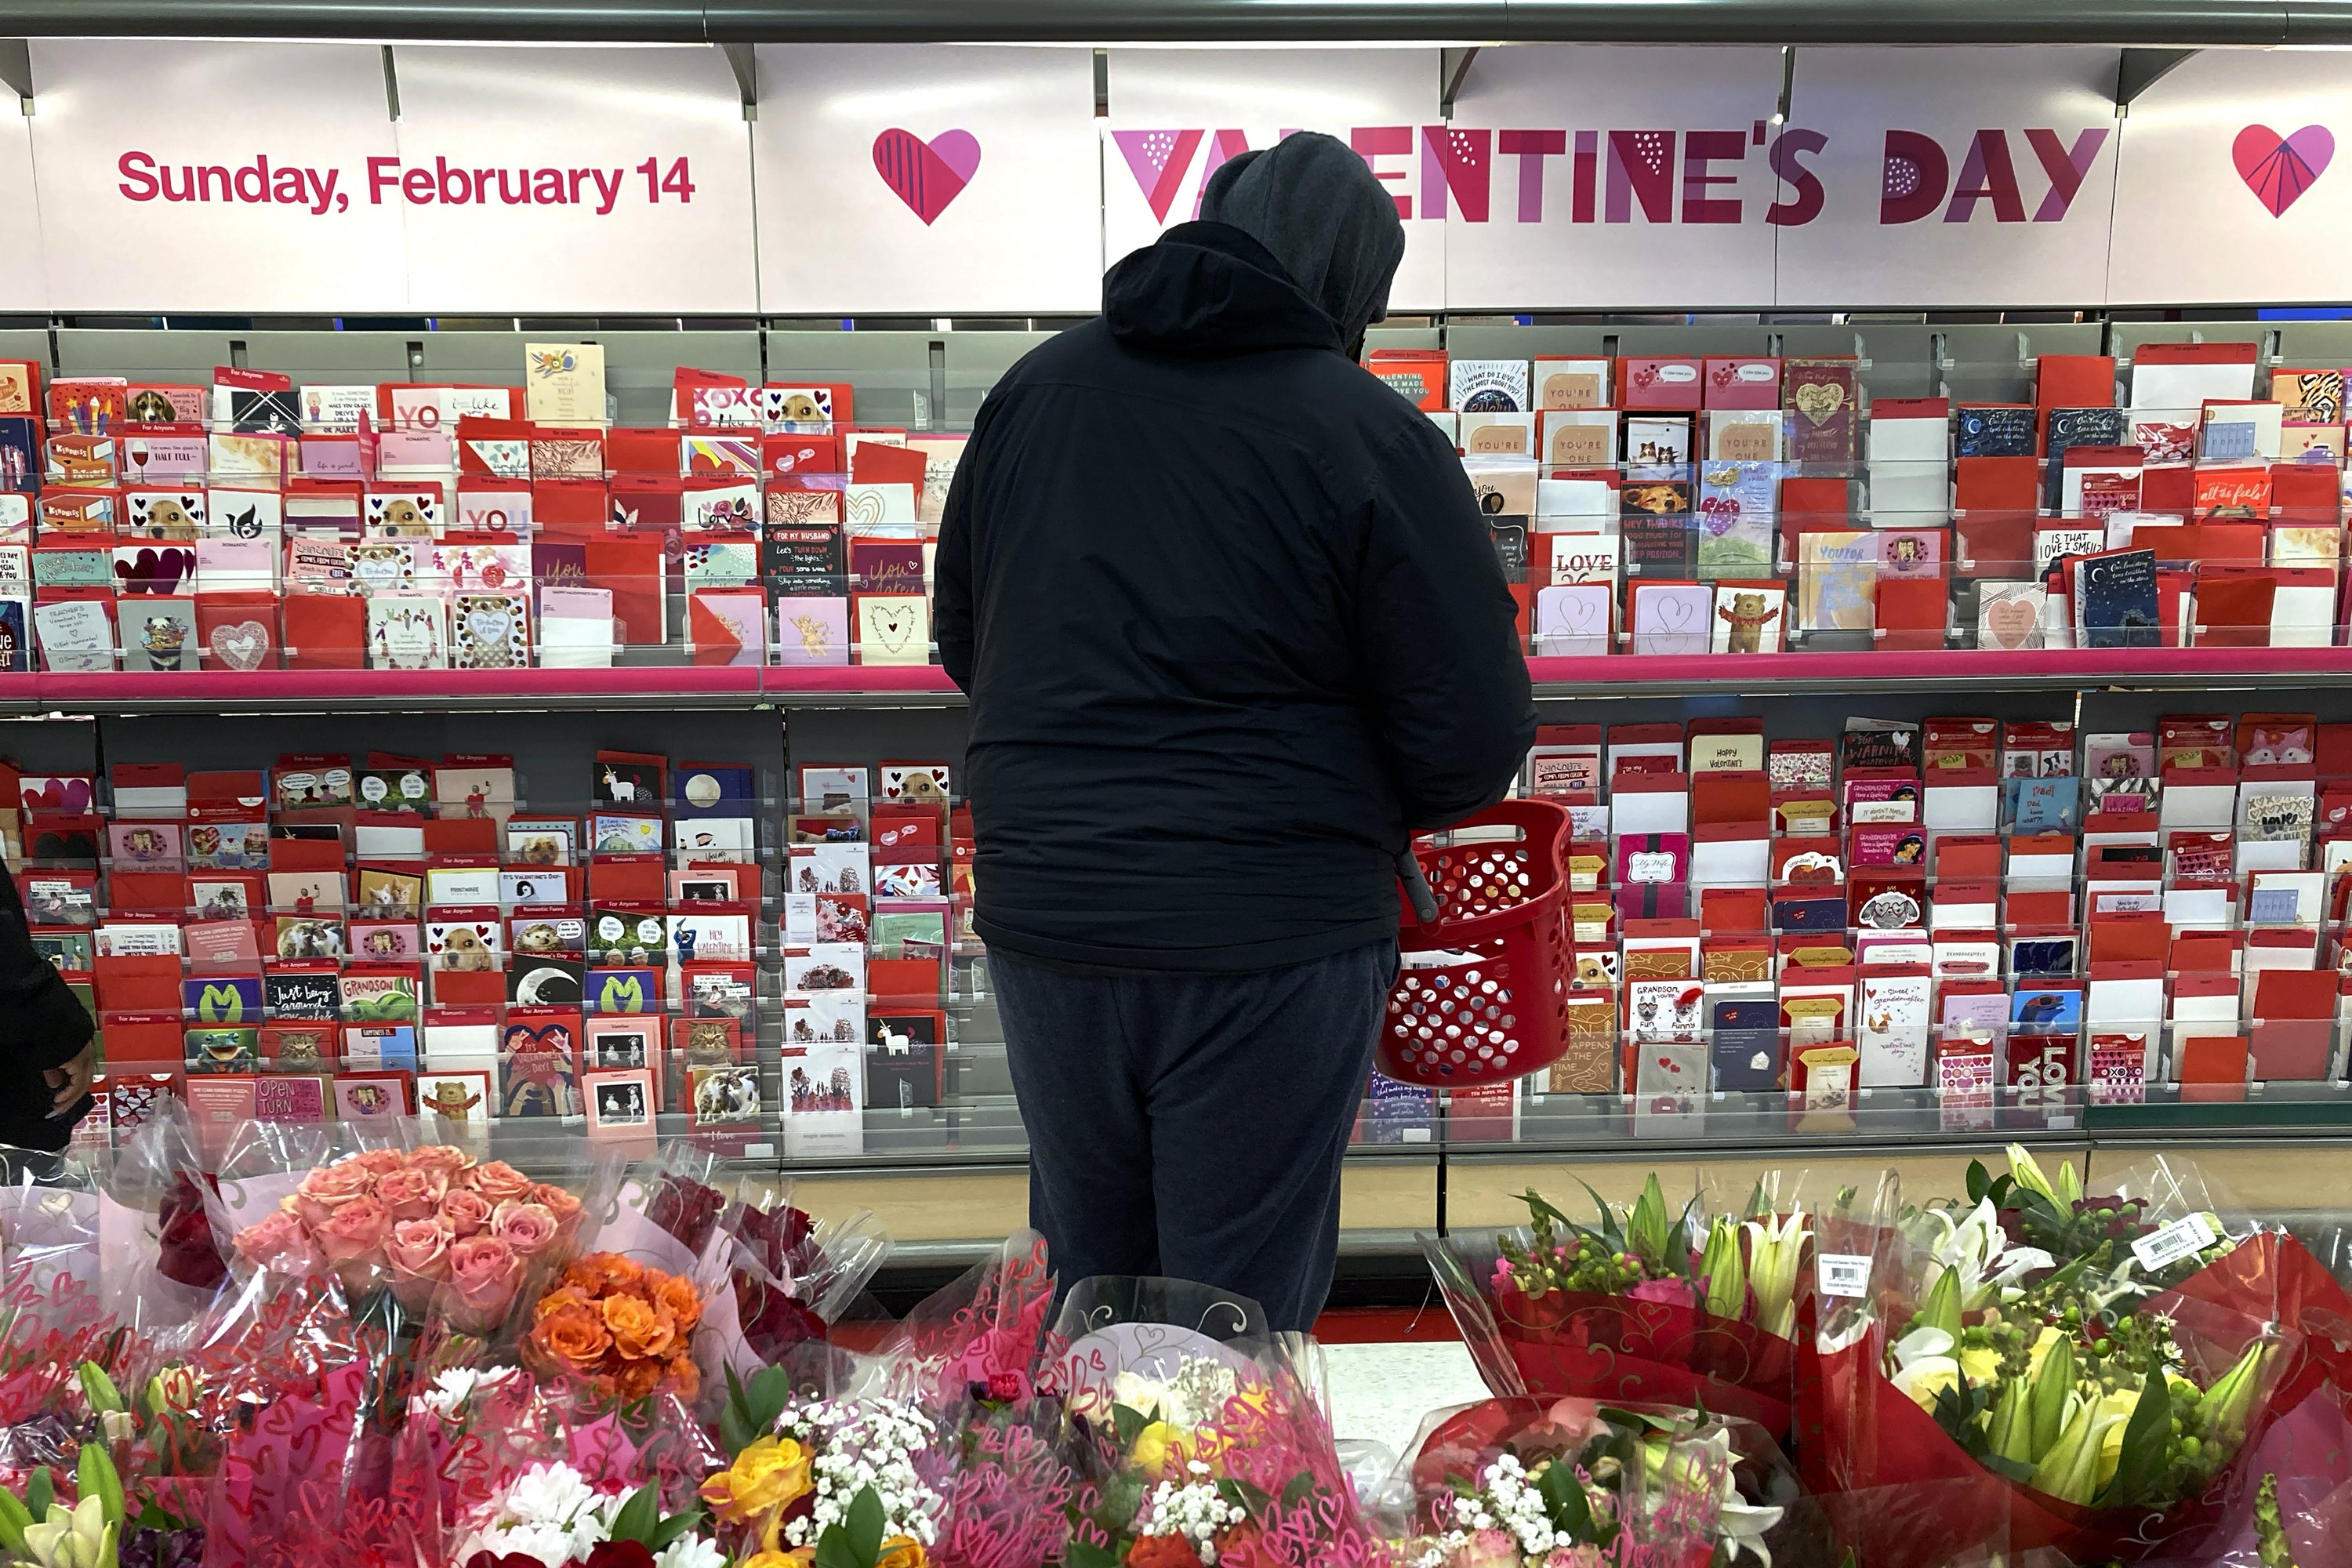 A sad Valentine’s Day, lovers find hope in roses, vaccines